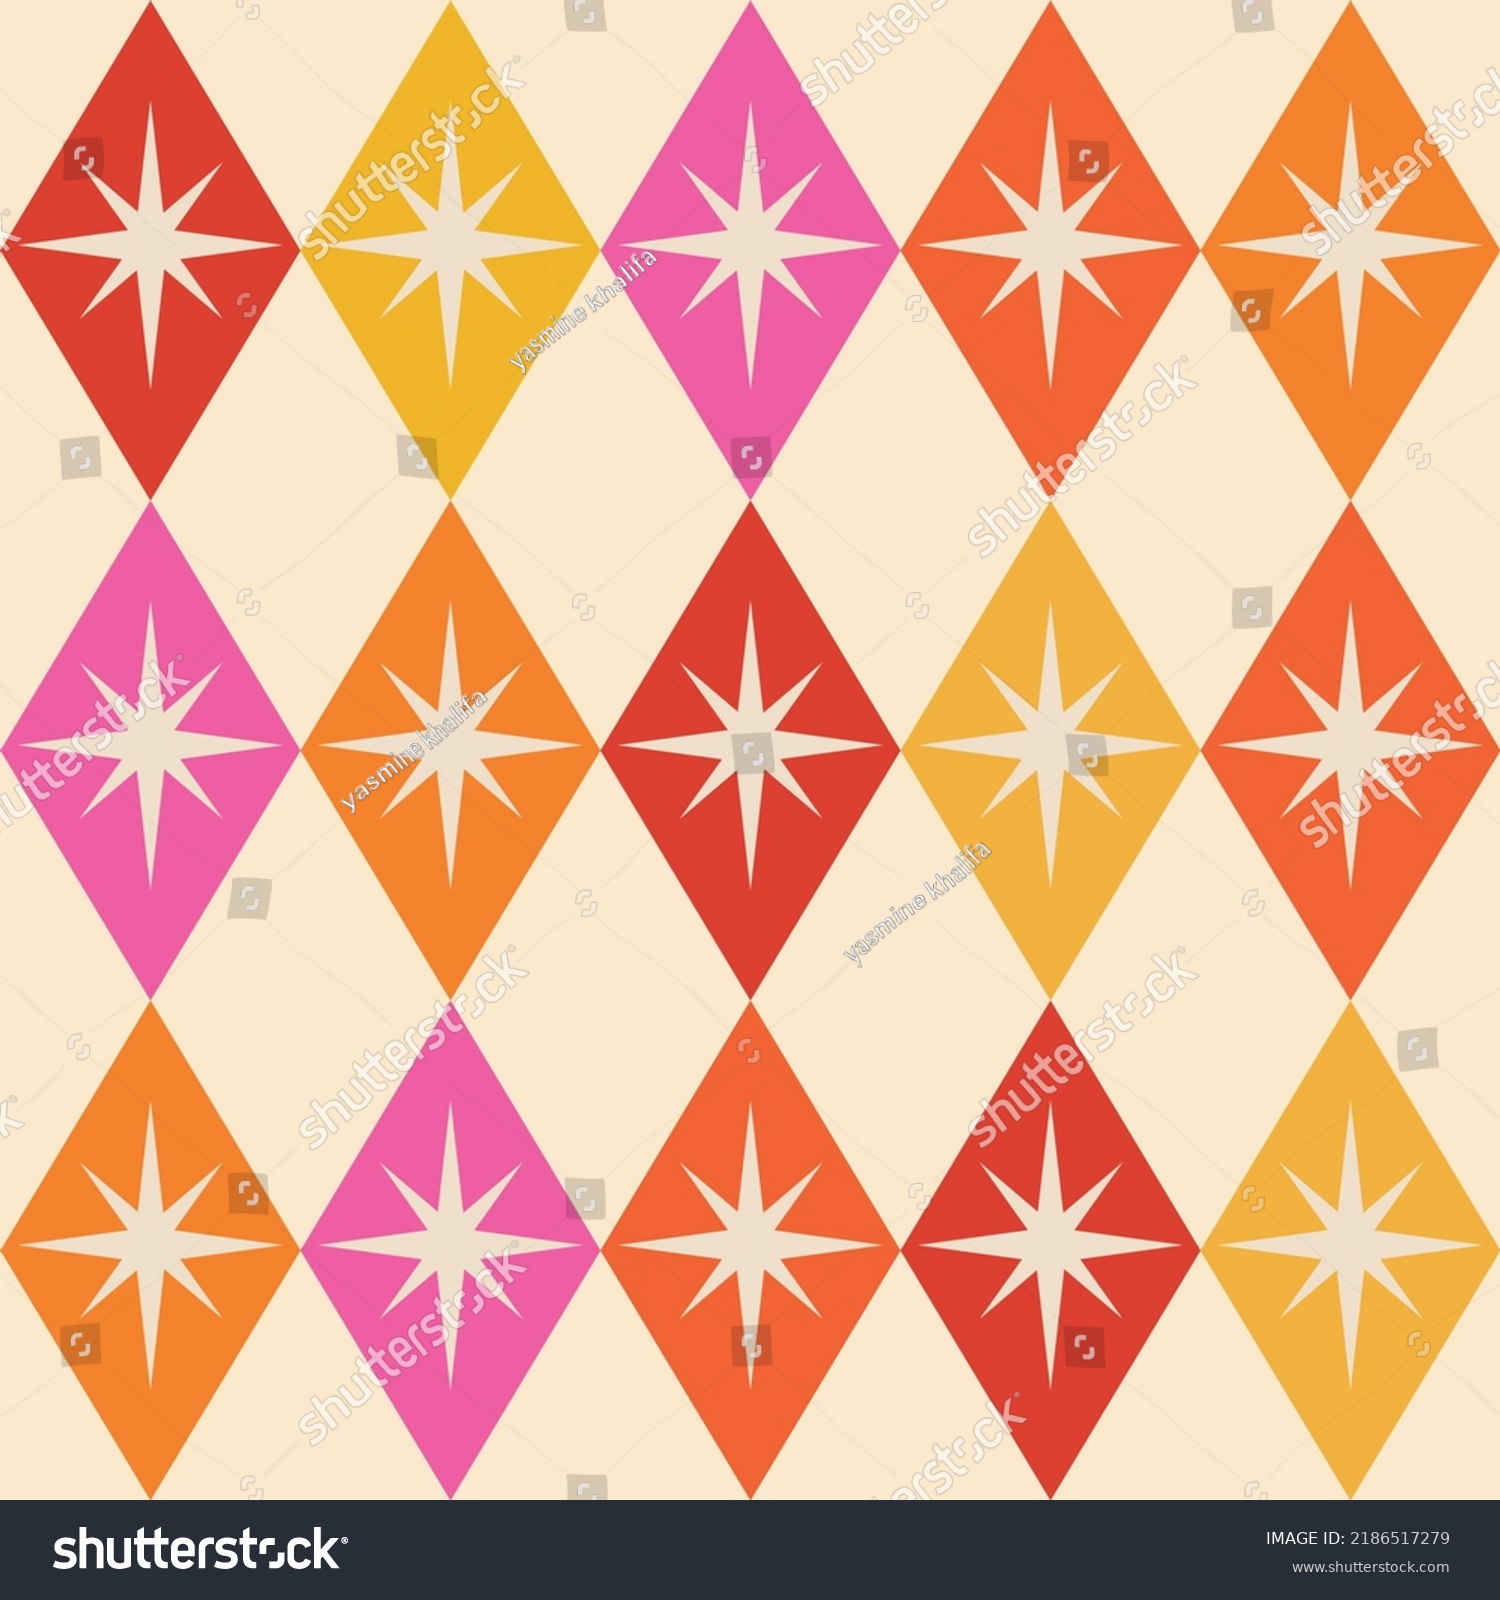 SVG of Mid century atomic starbursts over diamond argyle shapes in pink, orange, yellow and red. For textile, fabric, home décor and wallpaper	 svg